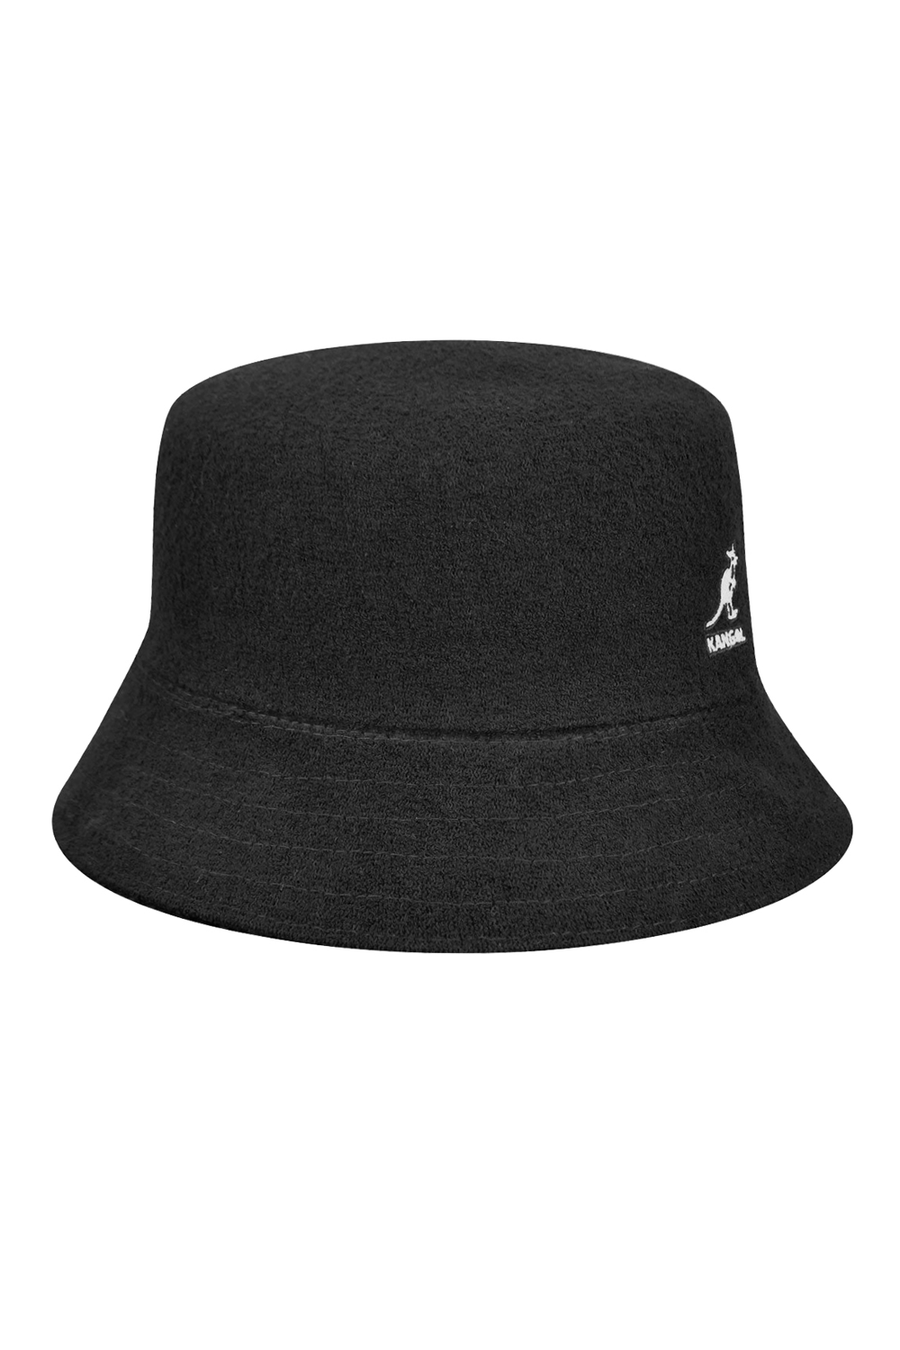 Buy the Kangol Bermuda Bucket Hat in Black at Intro. Spend £50 for free UK delivery. Official stockists. We ship worldwide.